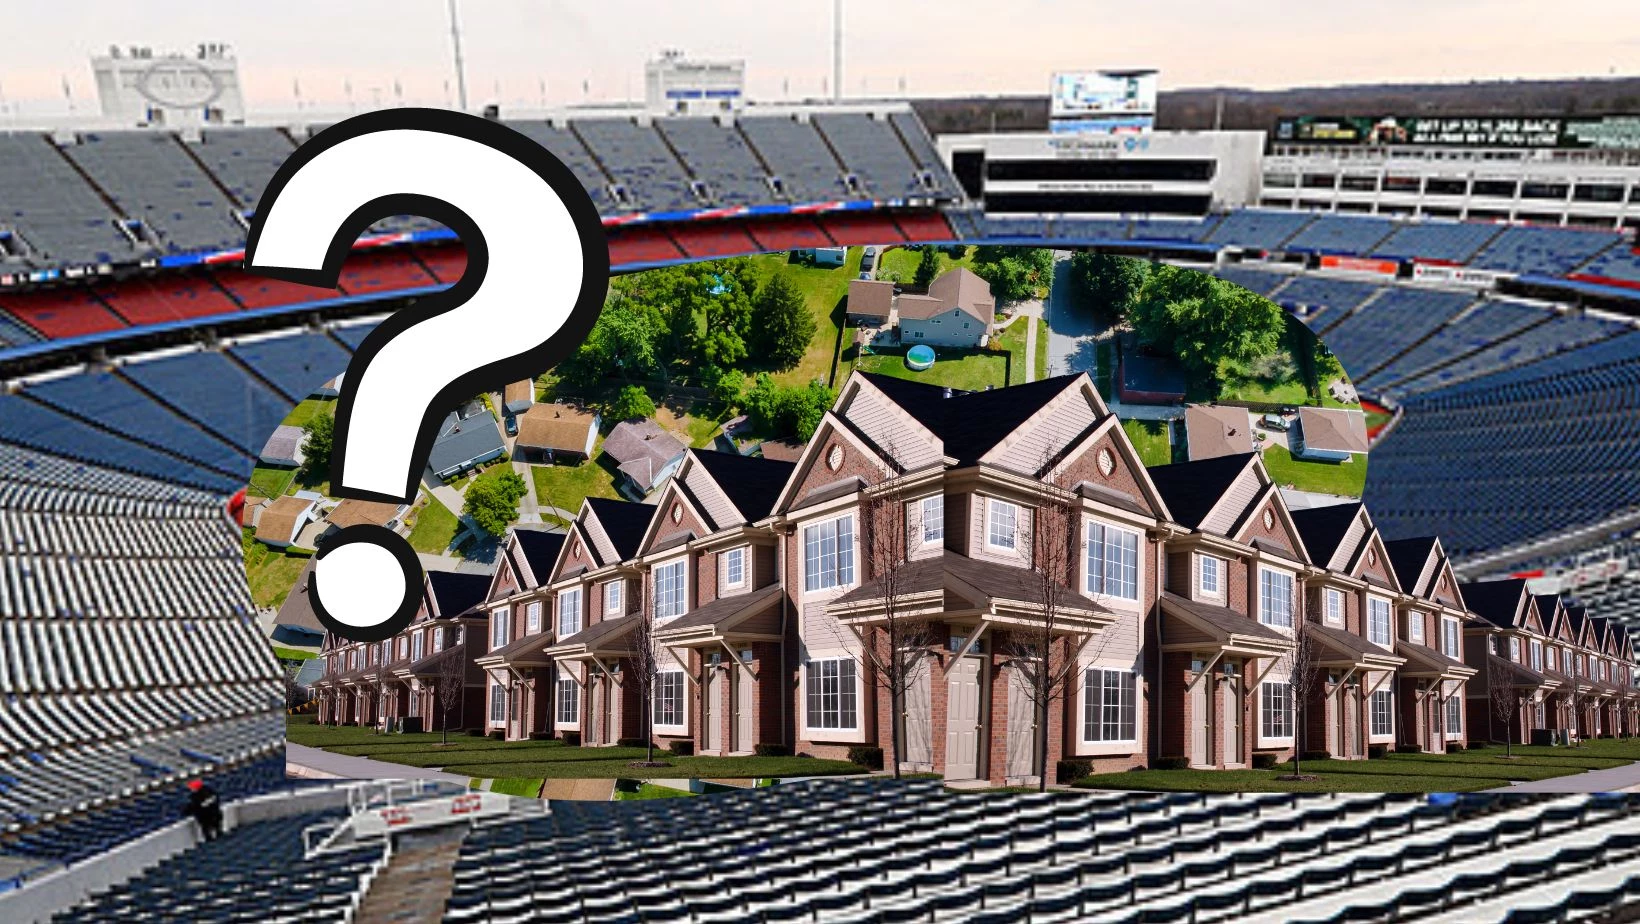 Could You Live In The Old Buffalo Bills Stadium?